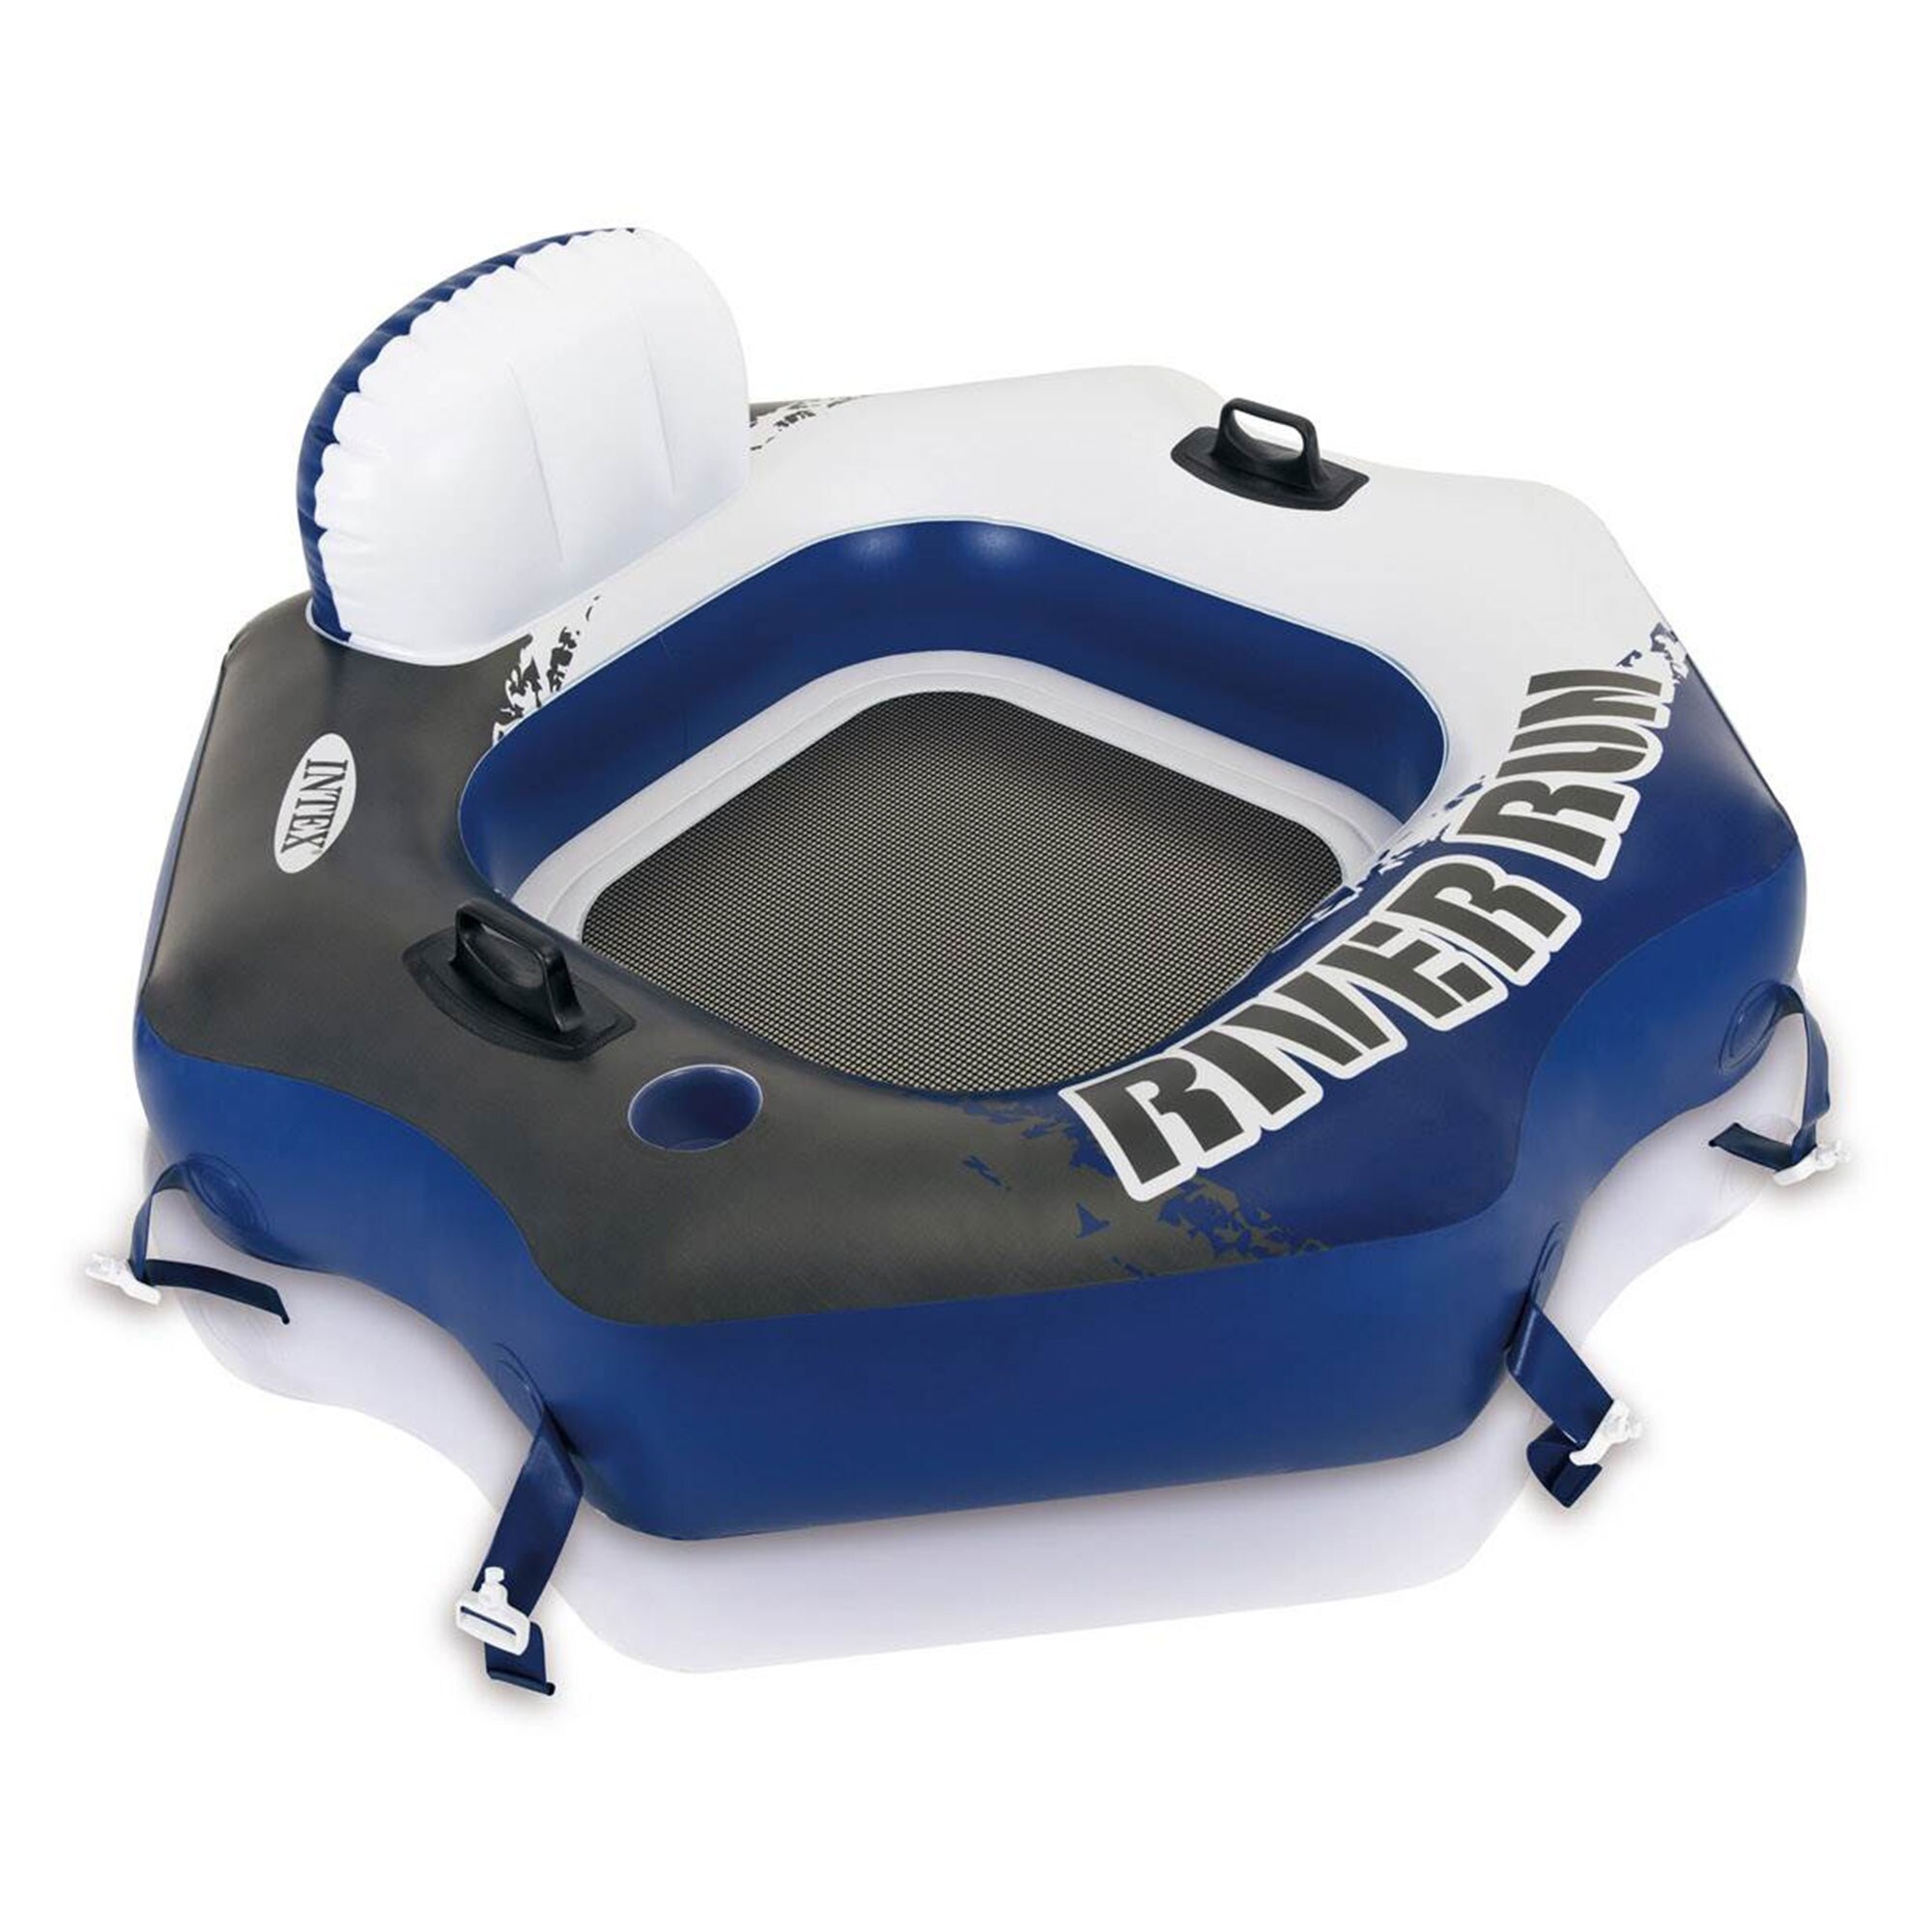 Beyond　Water　Inflatable　River　Tube　Intex　(2　6.5　Bed　58854EP　Lounge　Run　Floating　Connect　Pack)　Bath　35315427